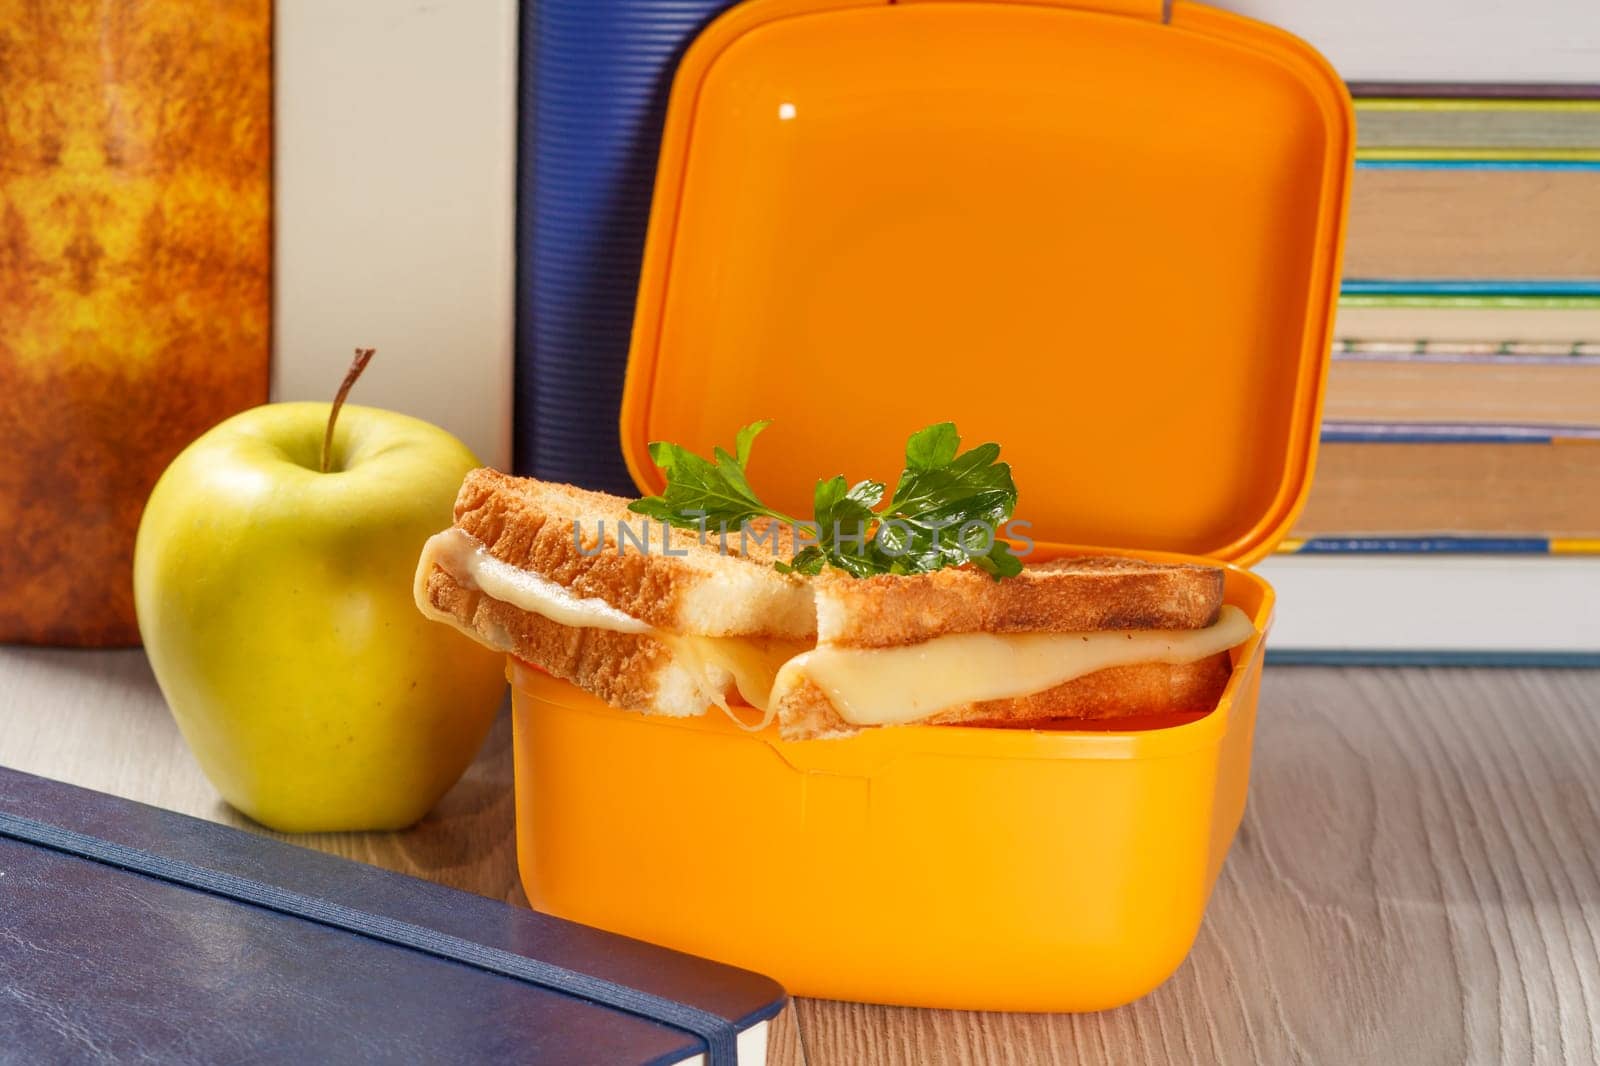 Yellow lunch box with toasted slices of bread, cheese and green parsley, green apple and hardback books on the background. School breakfast.